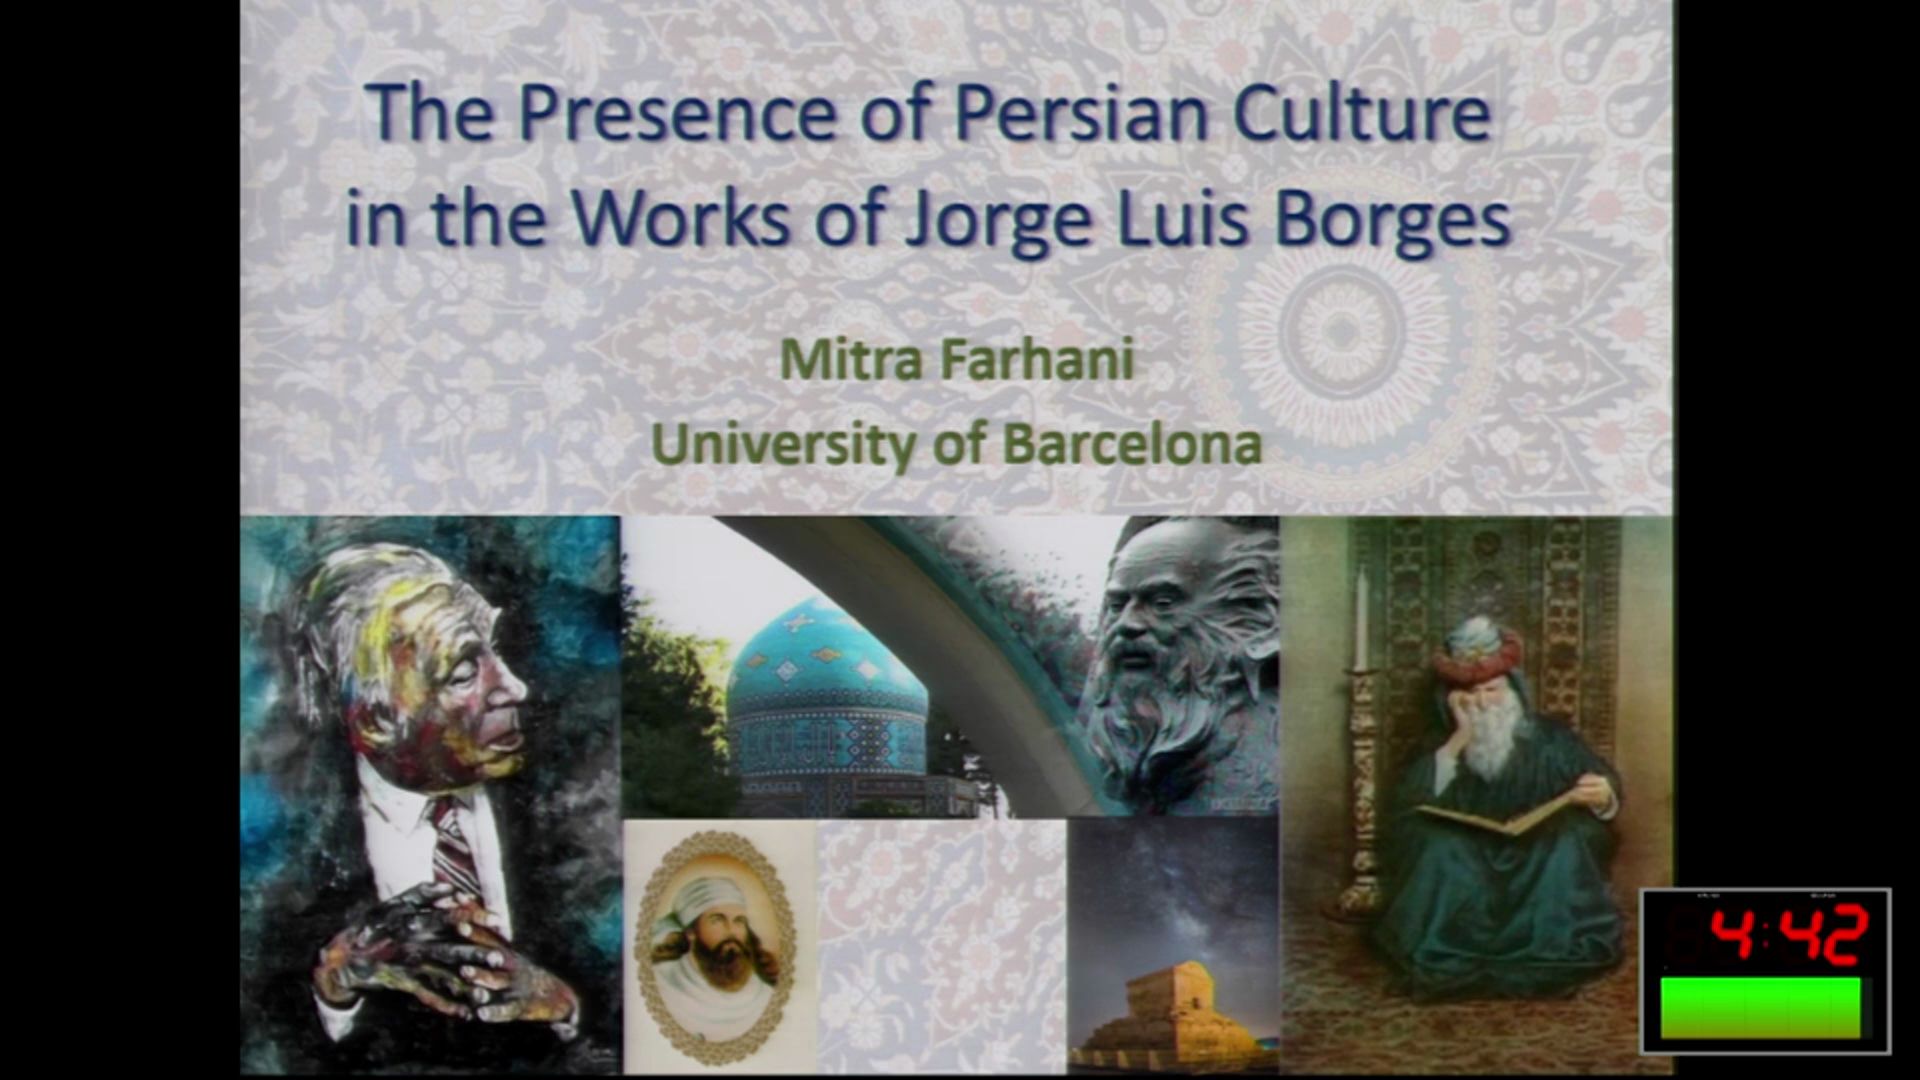 The presence of Persian culture in the works of Jorge Luis Borges